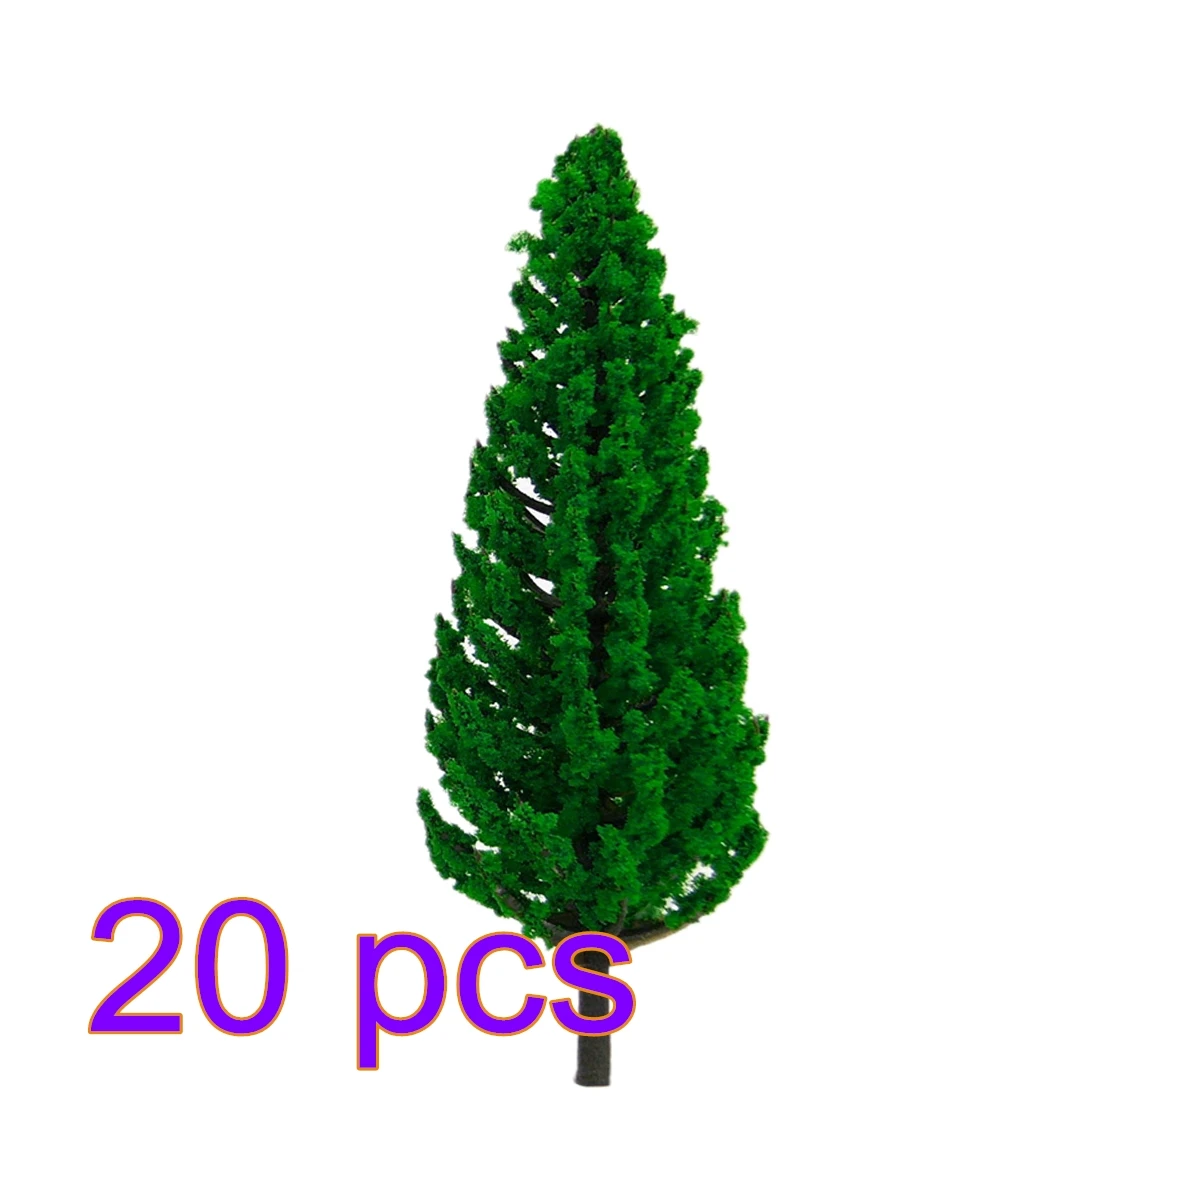 

20pcs 9.5cm/11cm/13m15cm/16cm Height Pine Tree Model Sand Table Scenery Building Accessories for Ho 1:85 Scale Toy Train